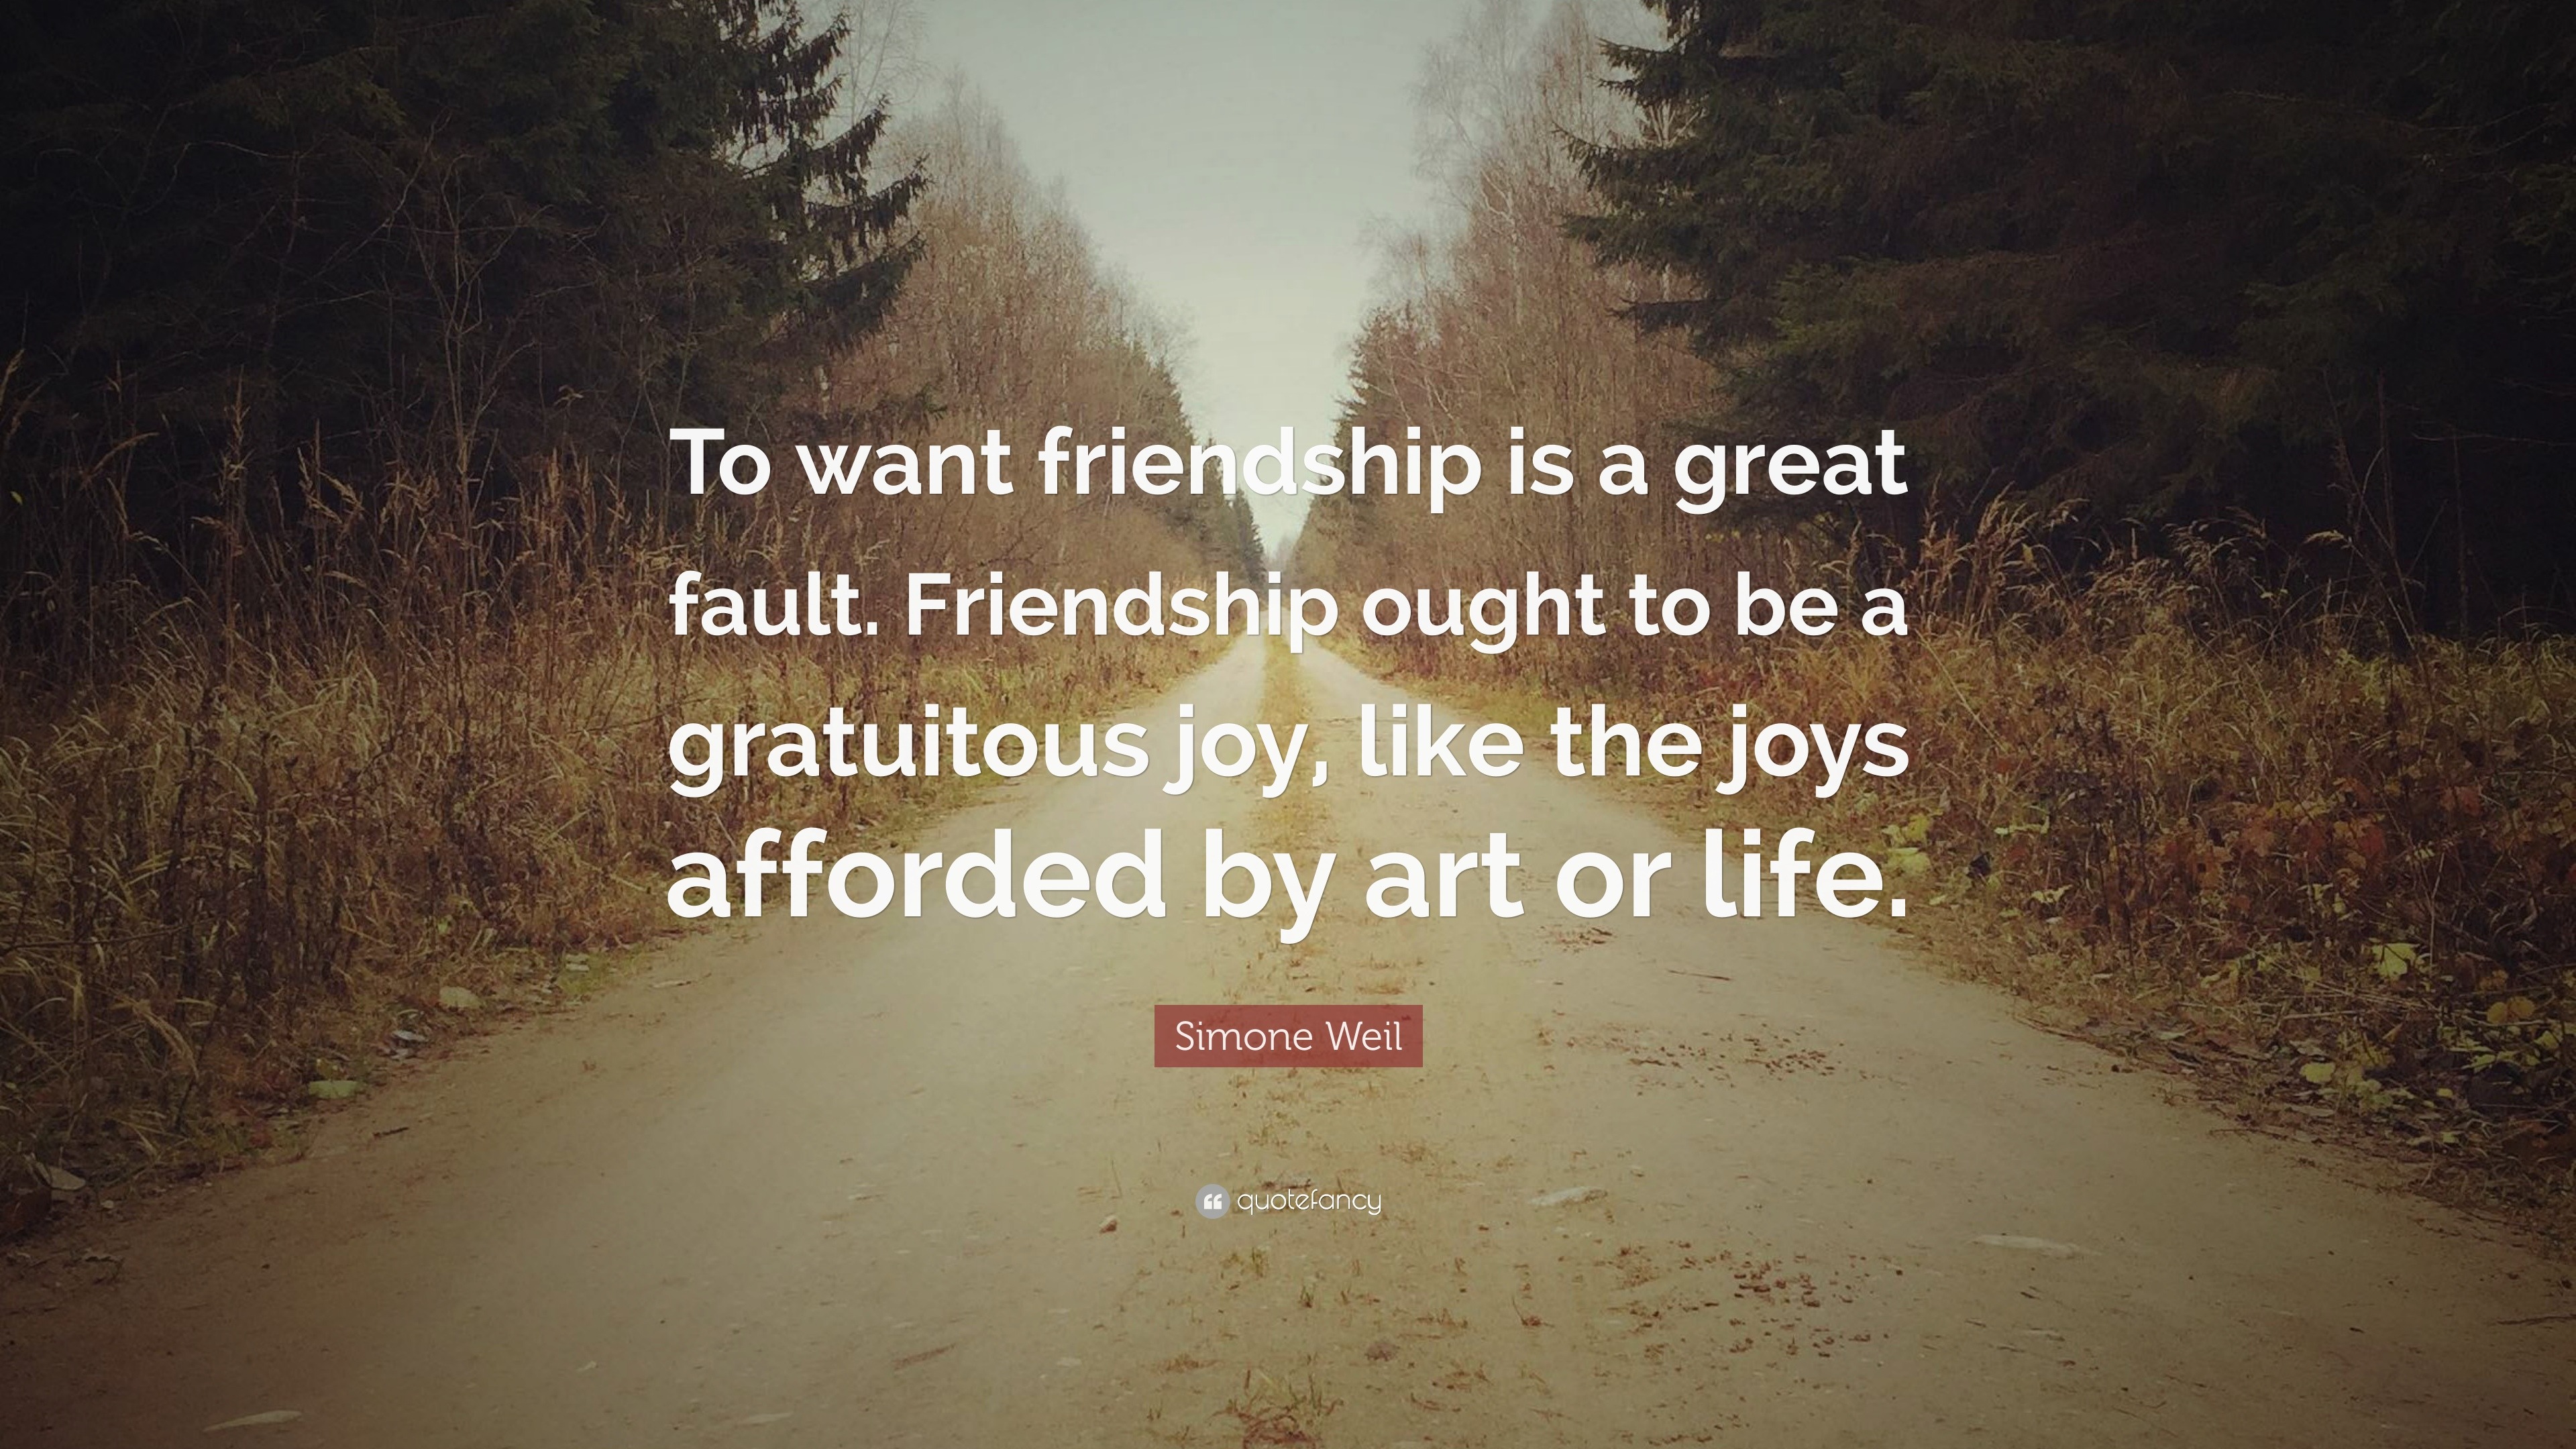 Simone Weil Quote: “To want friendship is a great fault. Friendship ...